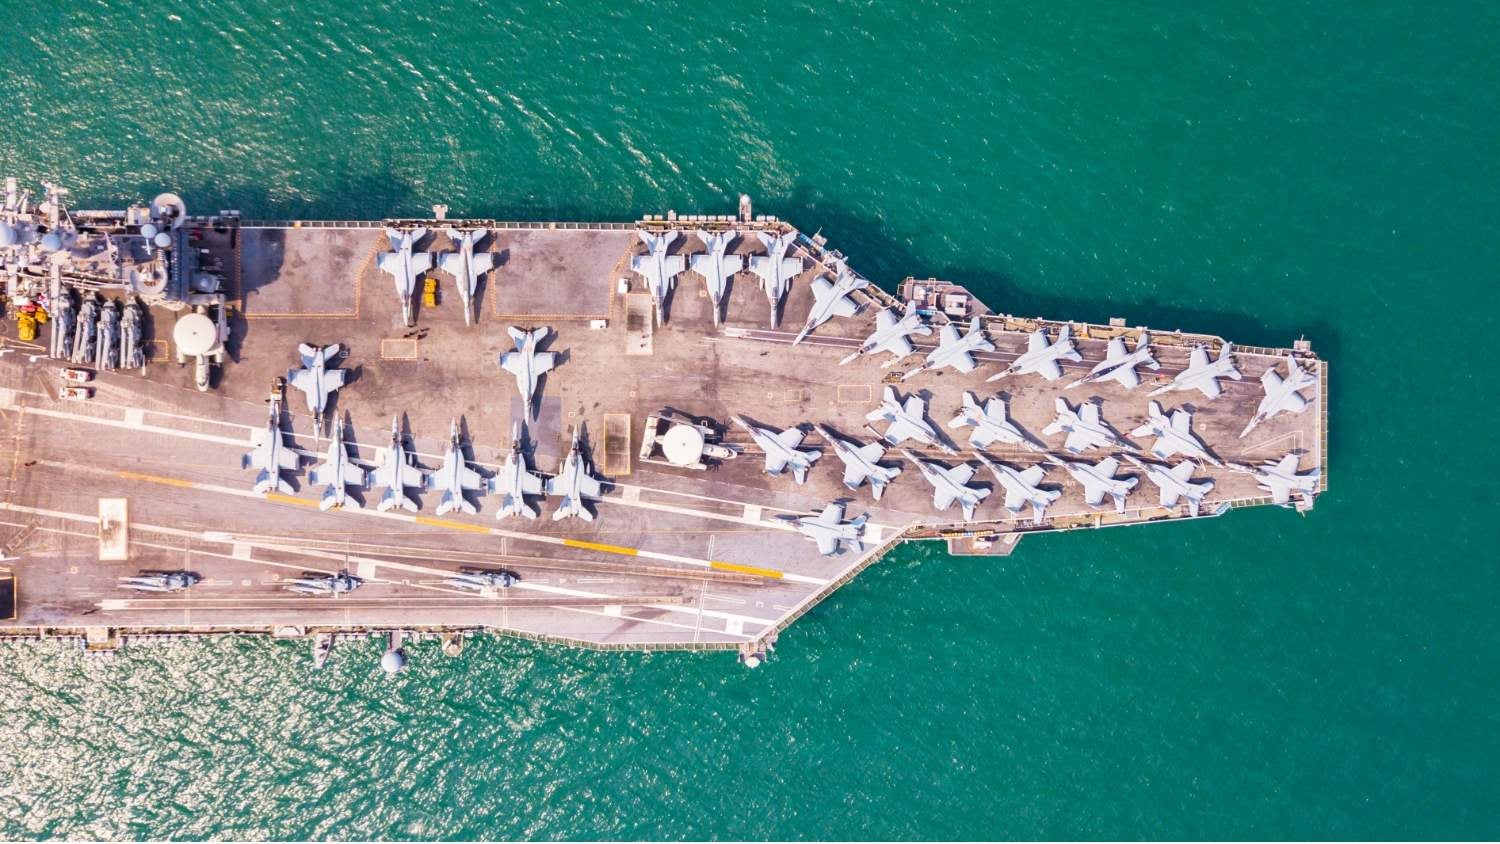 Overhead image of planes on a military ship